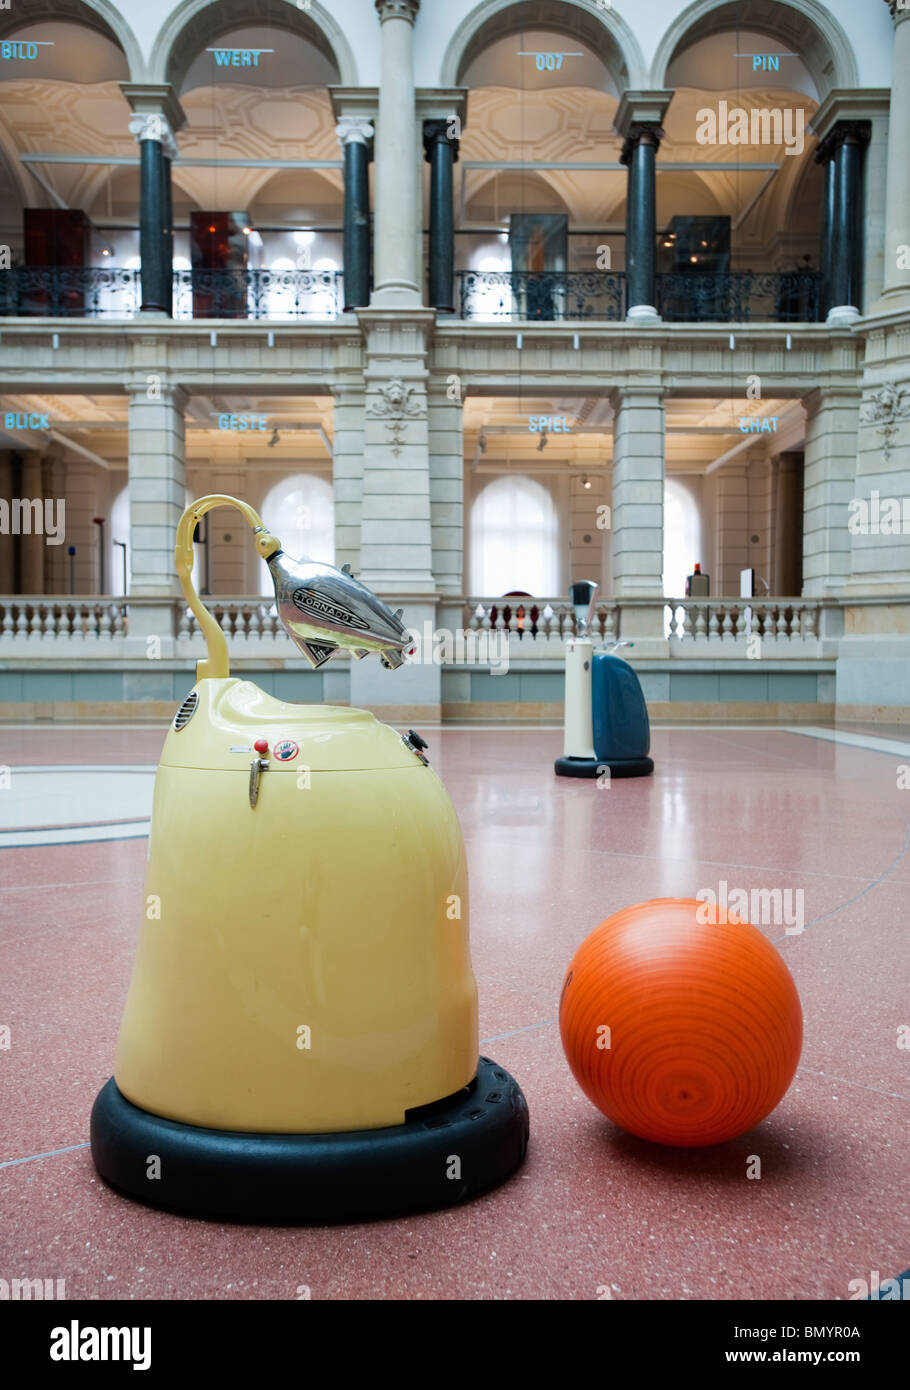 Football playing robots at the Communication Museum in Mitte Berlin Germany Stock Photo